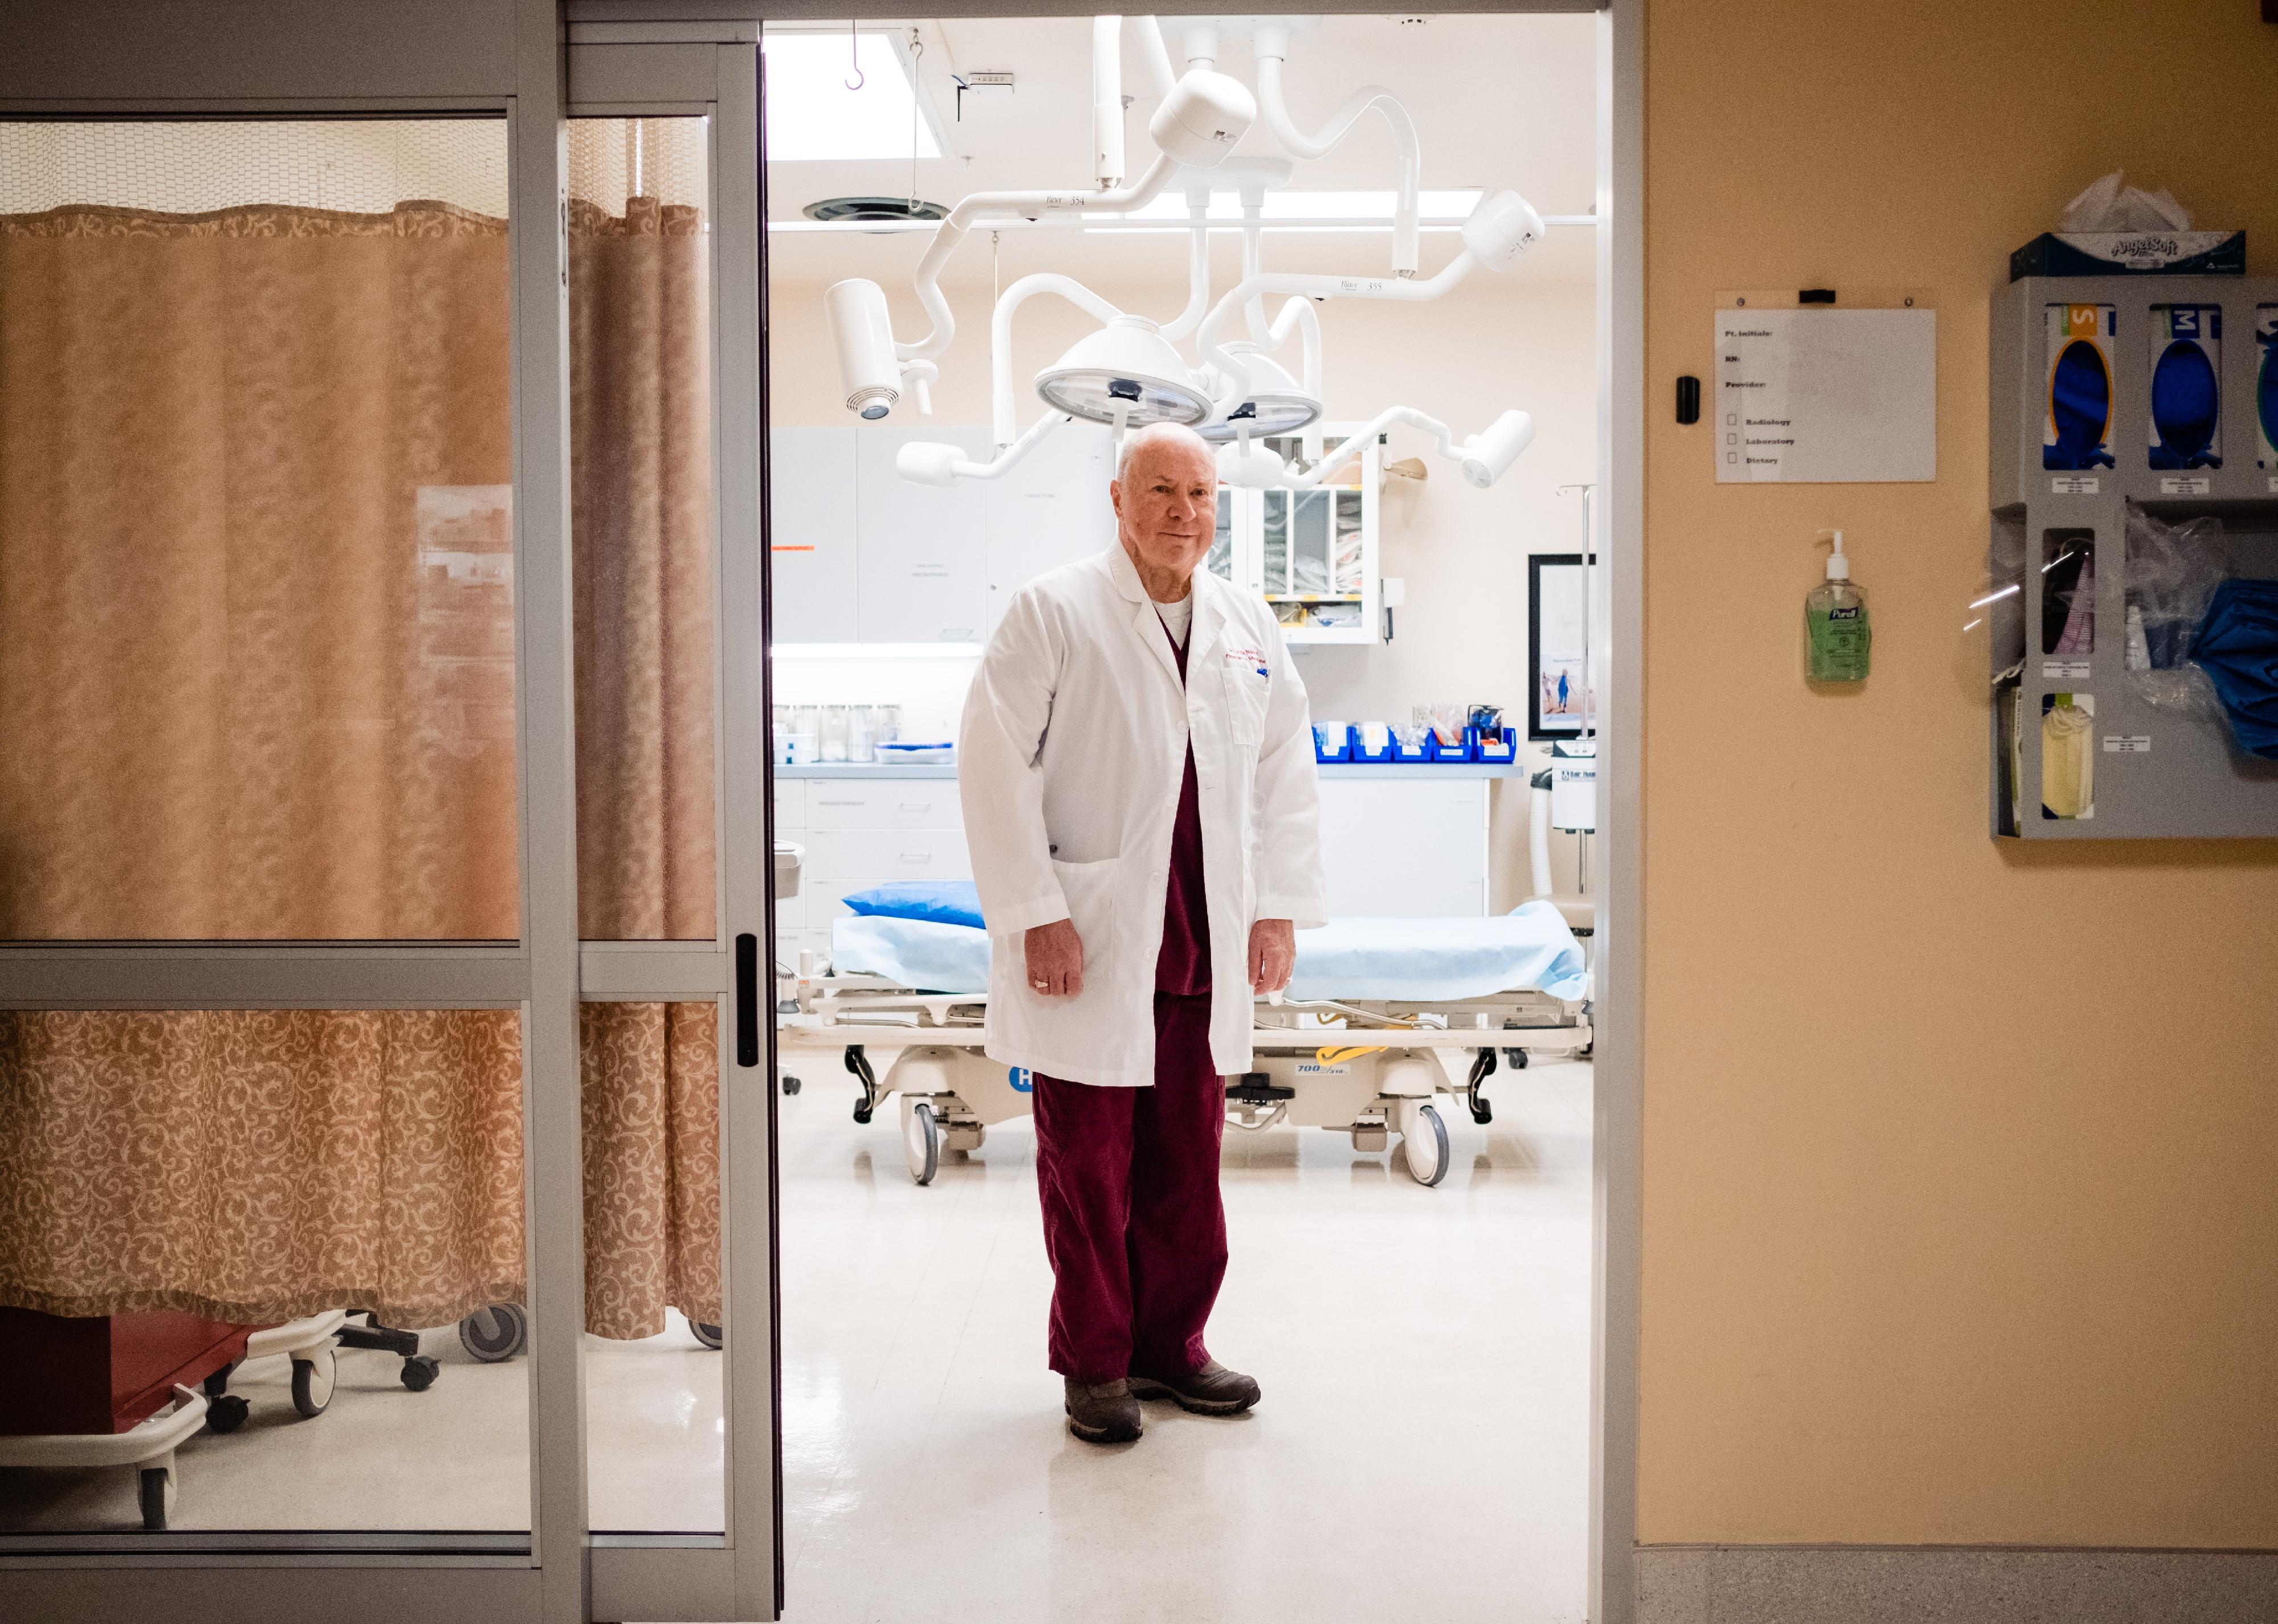 A doctor standing in the doorway of a hospital room.